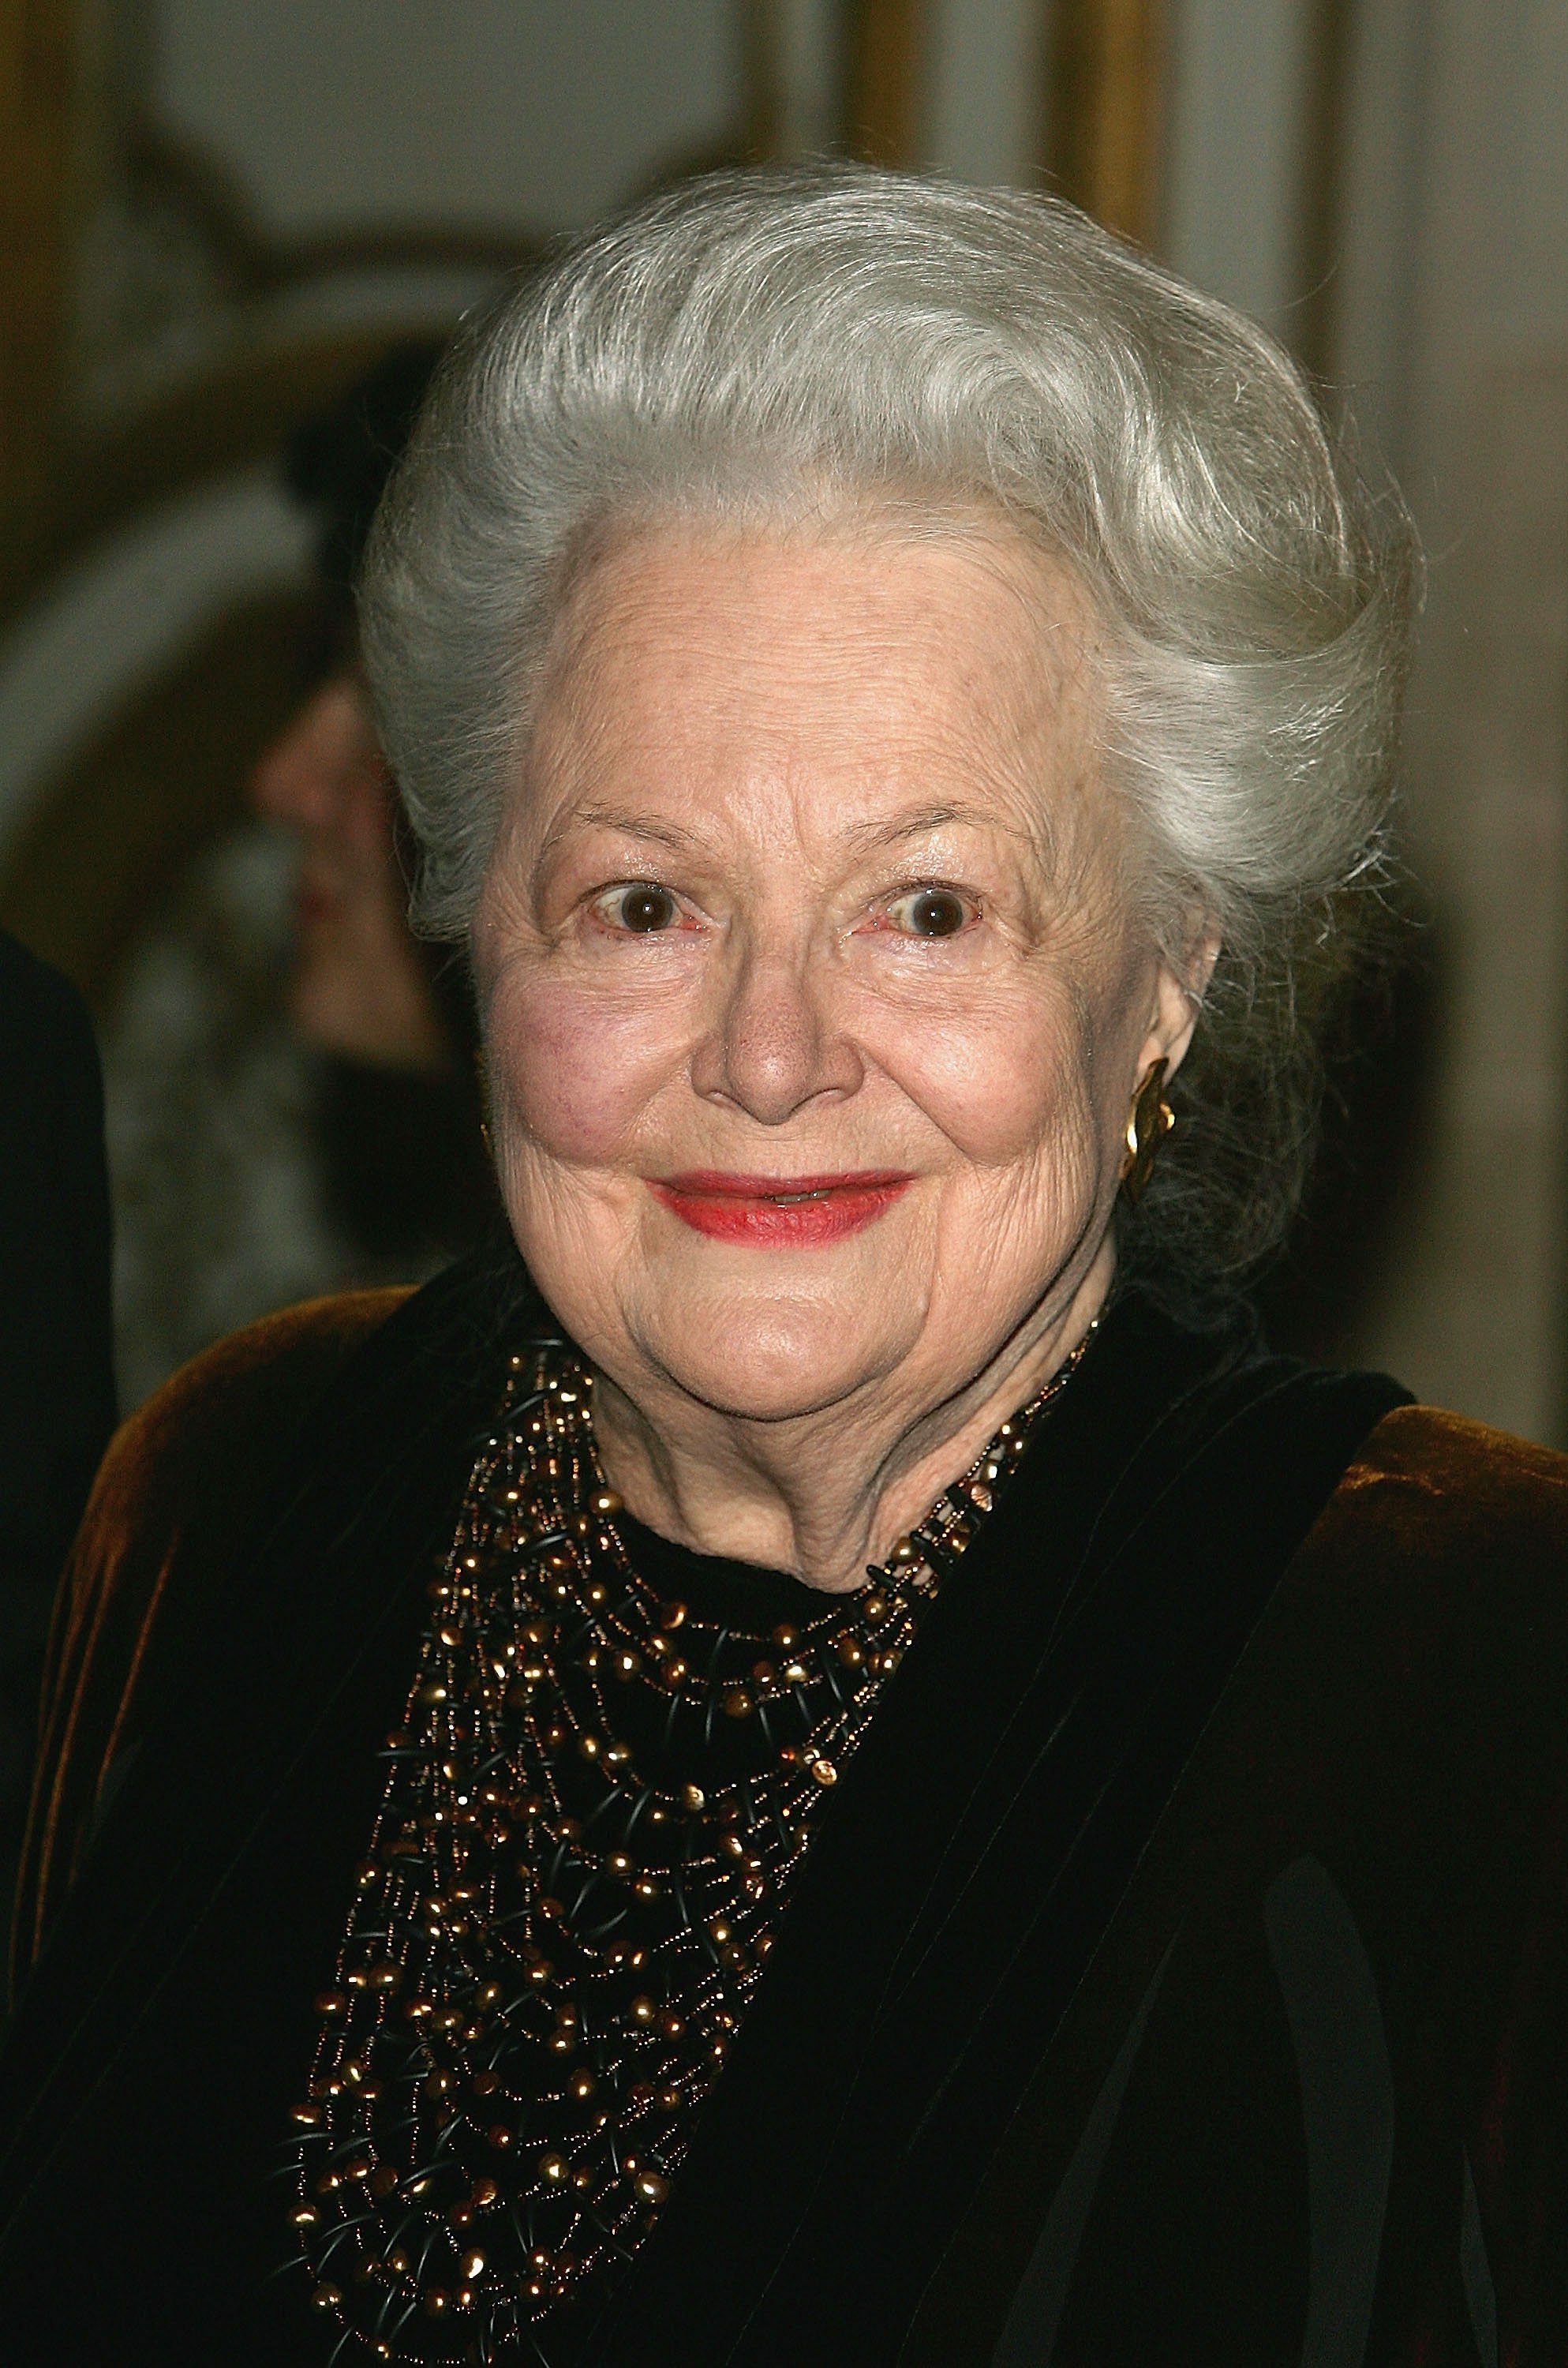 Olivia de Havilland arrives to attend the International evening of the child on November 28, 2005 in Versailles, France | Source: Getty Images